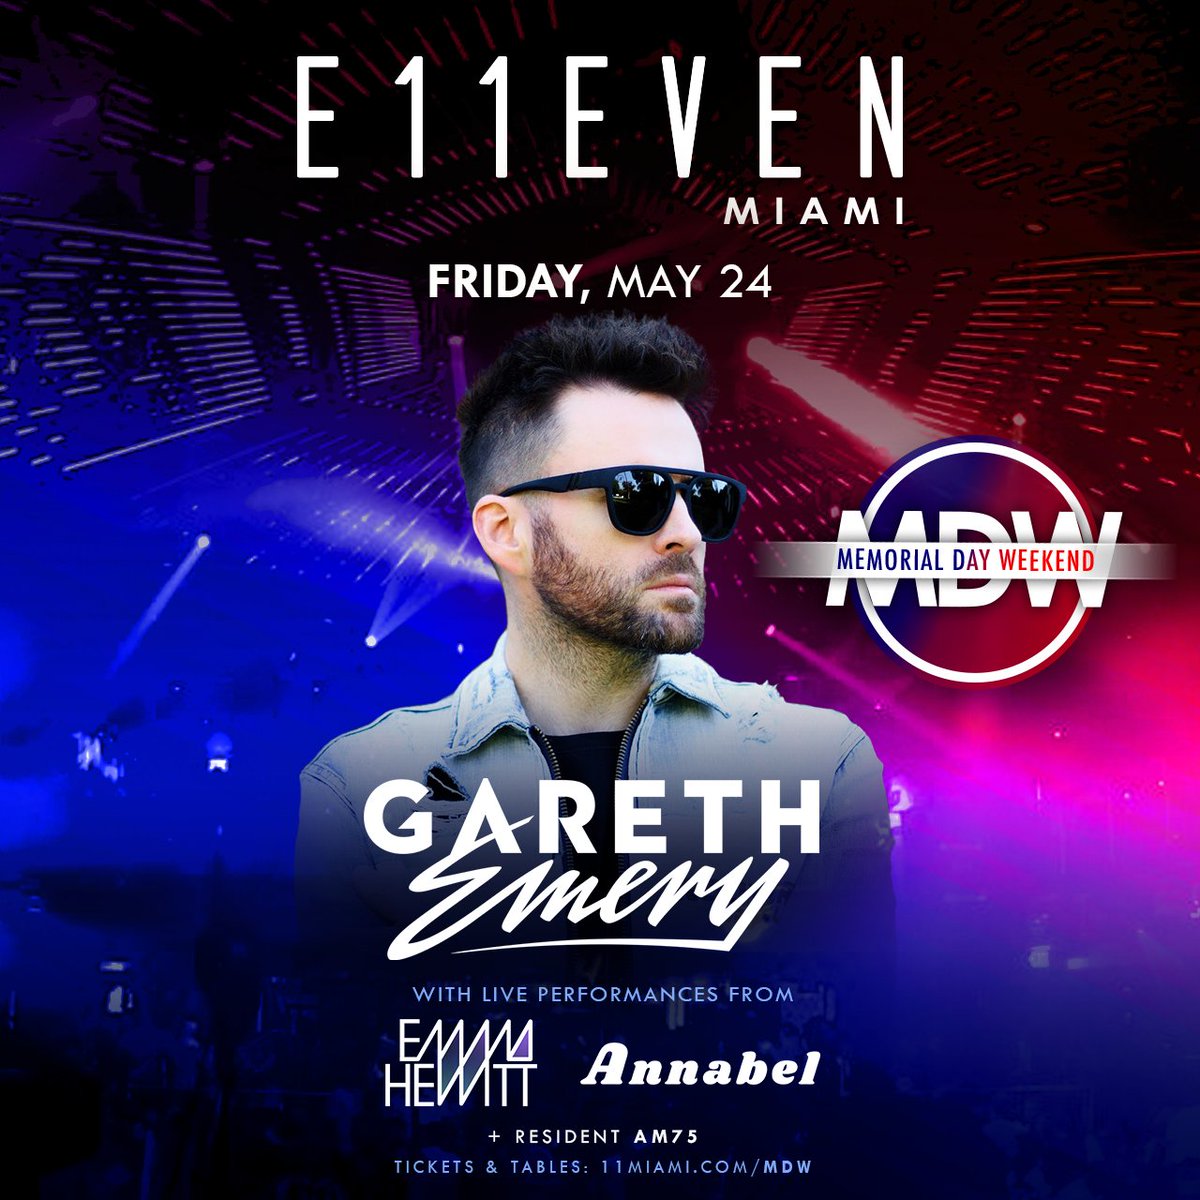 Trance lovers this one’s for you 😎 @GarethEmery at @11Miami #MDW Friday, May 24 With live performances from @EmHewitt & Annabel Tickets & Tables: 11miami.com/mdw #11Miami #GarethEmery #EmmaHewitt